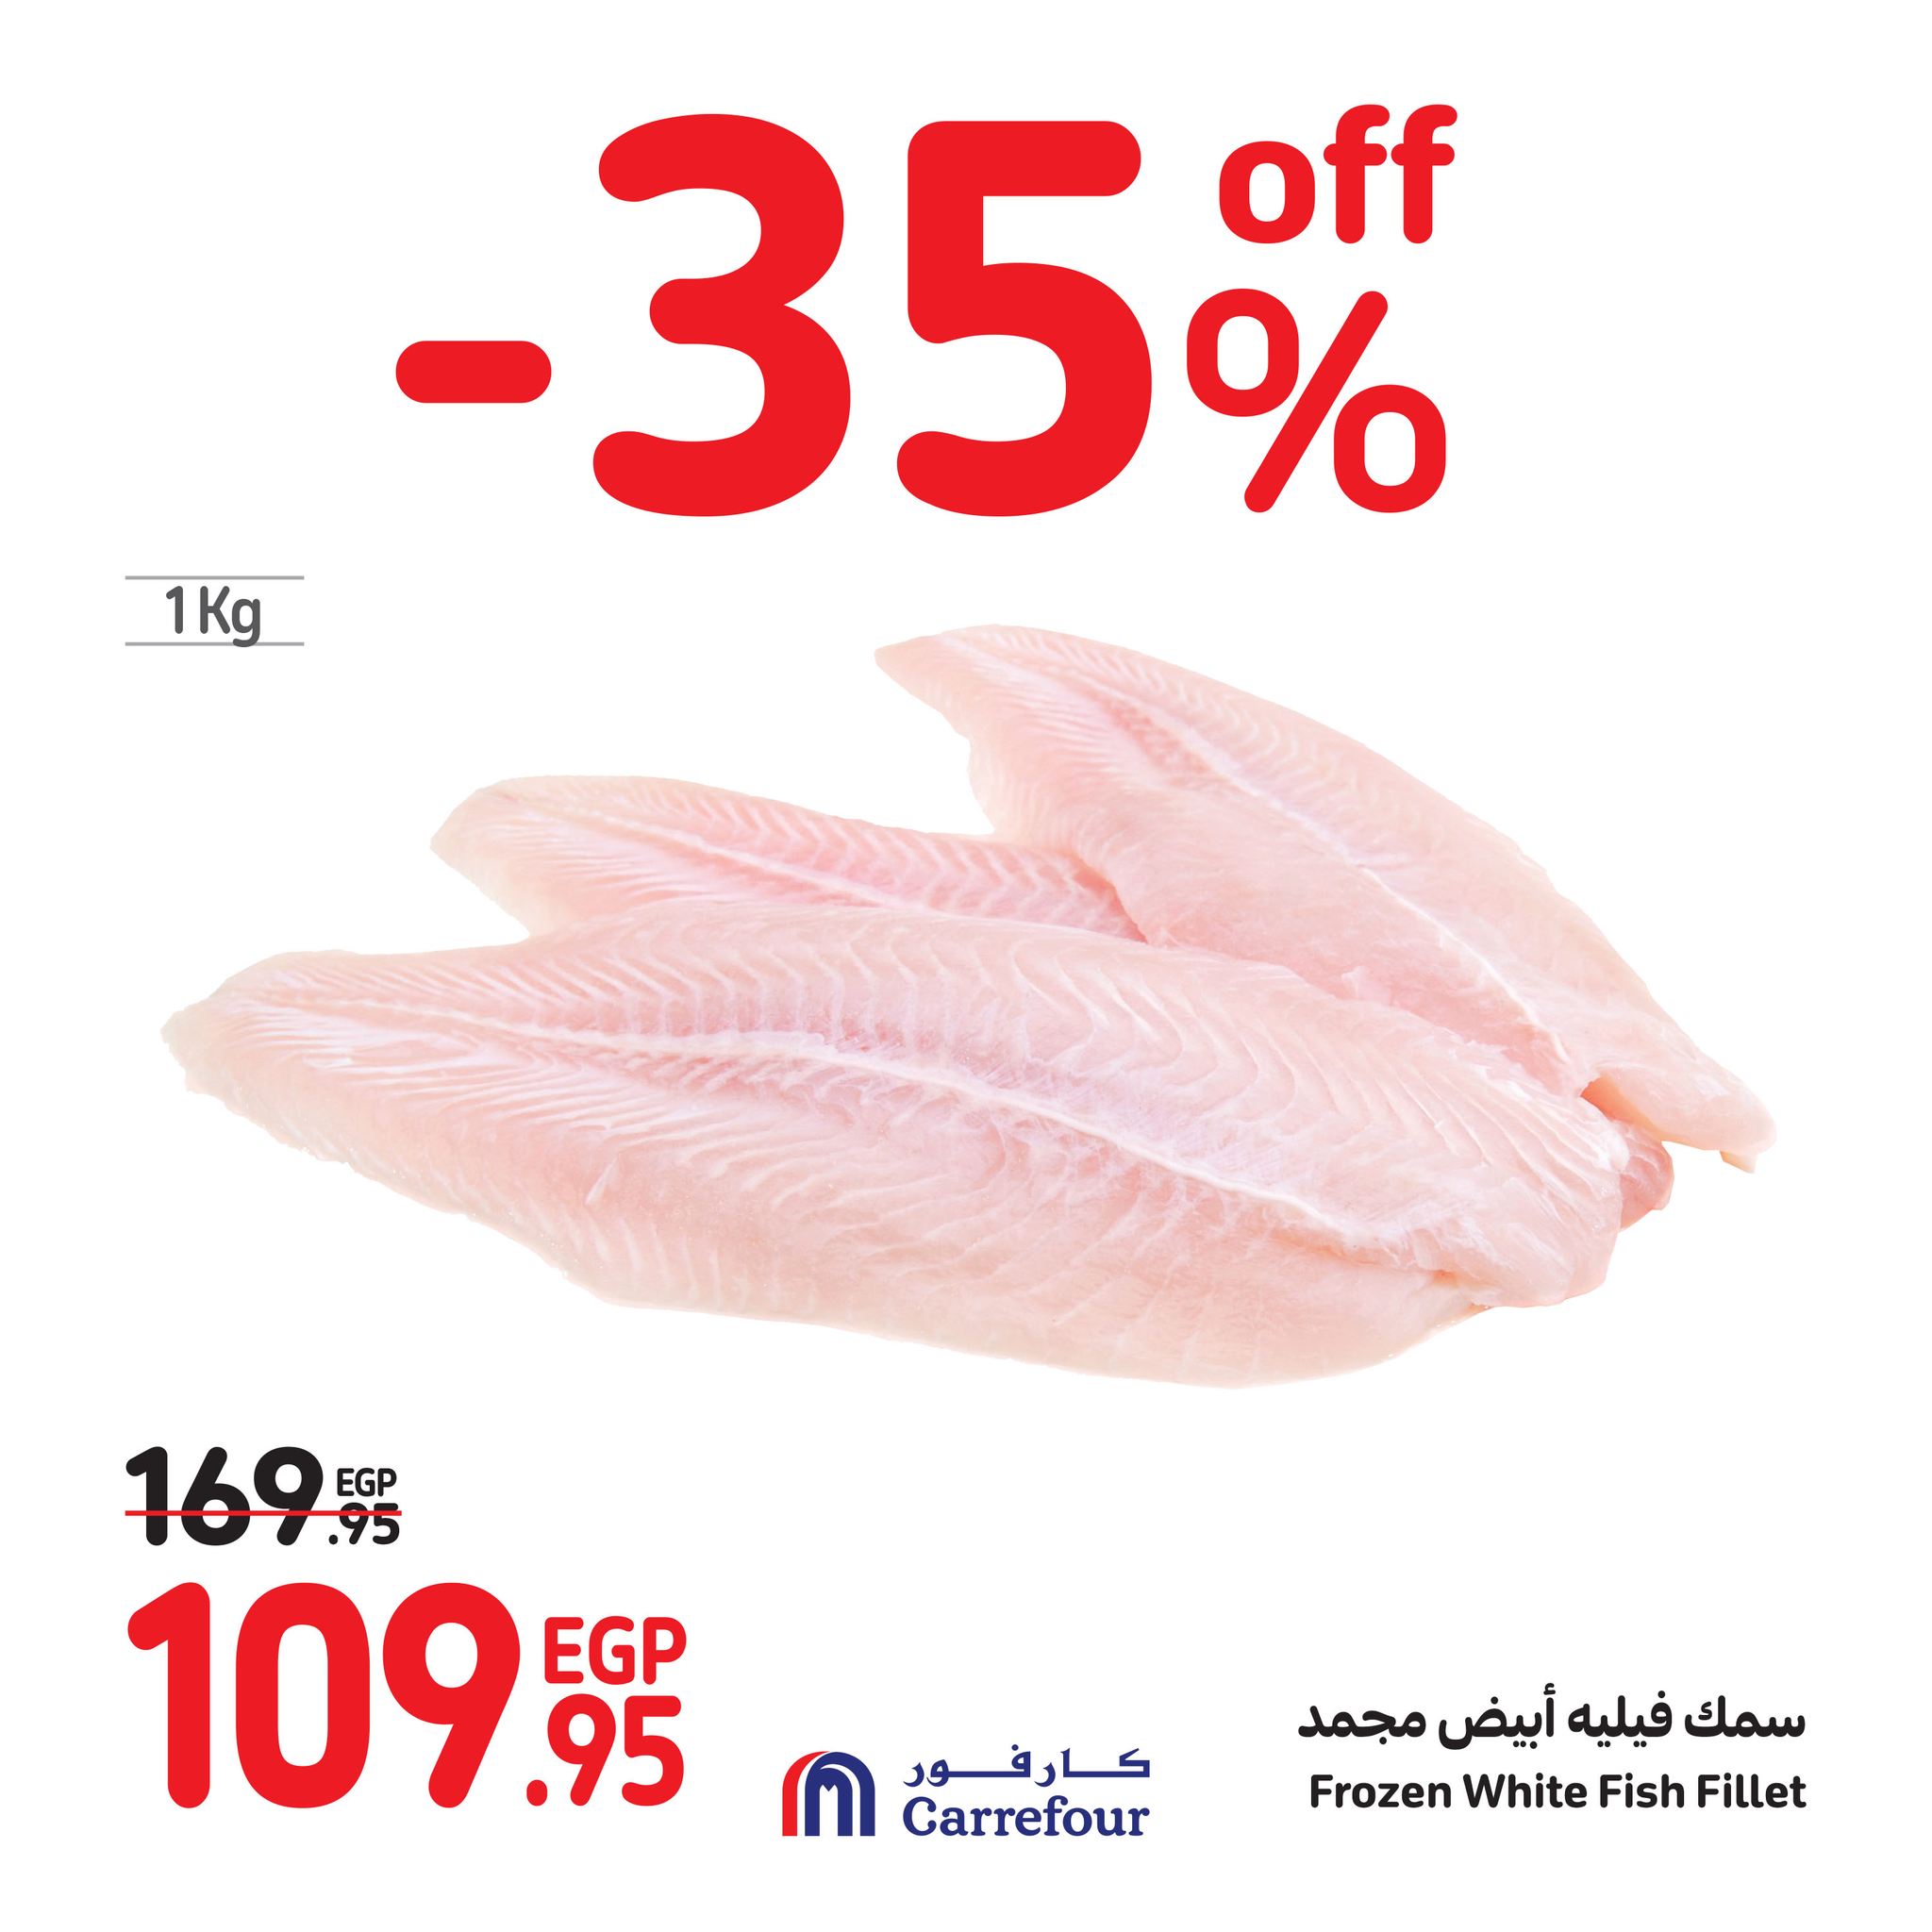 Page 15 at Fresh Deals at Carrefour Egypt